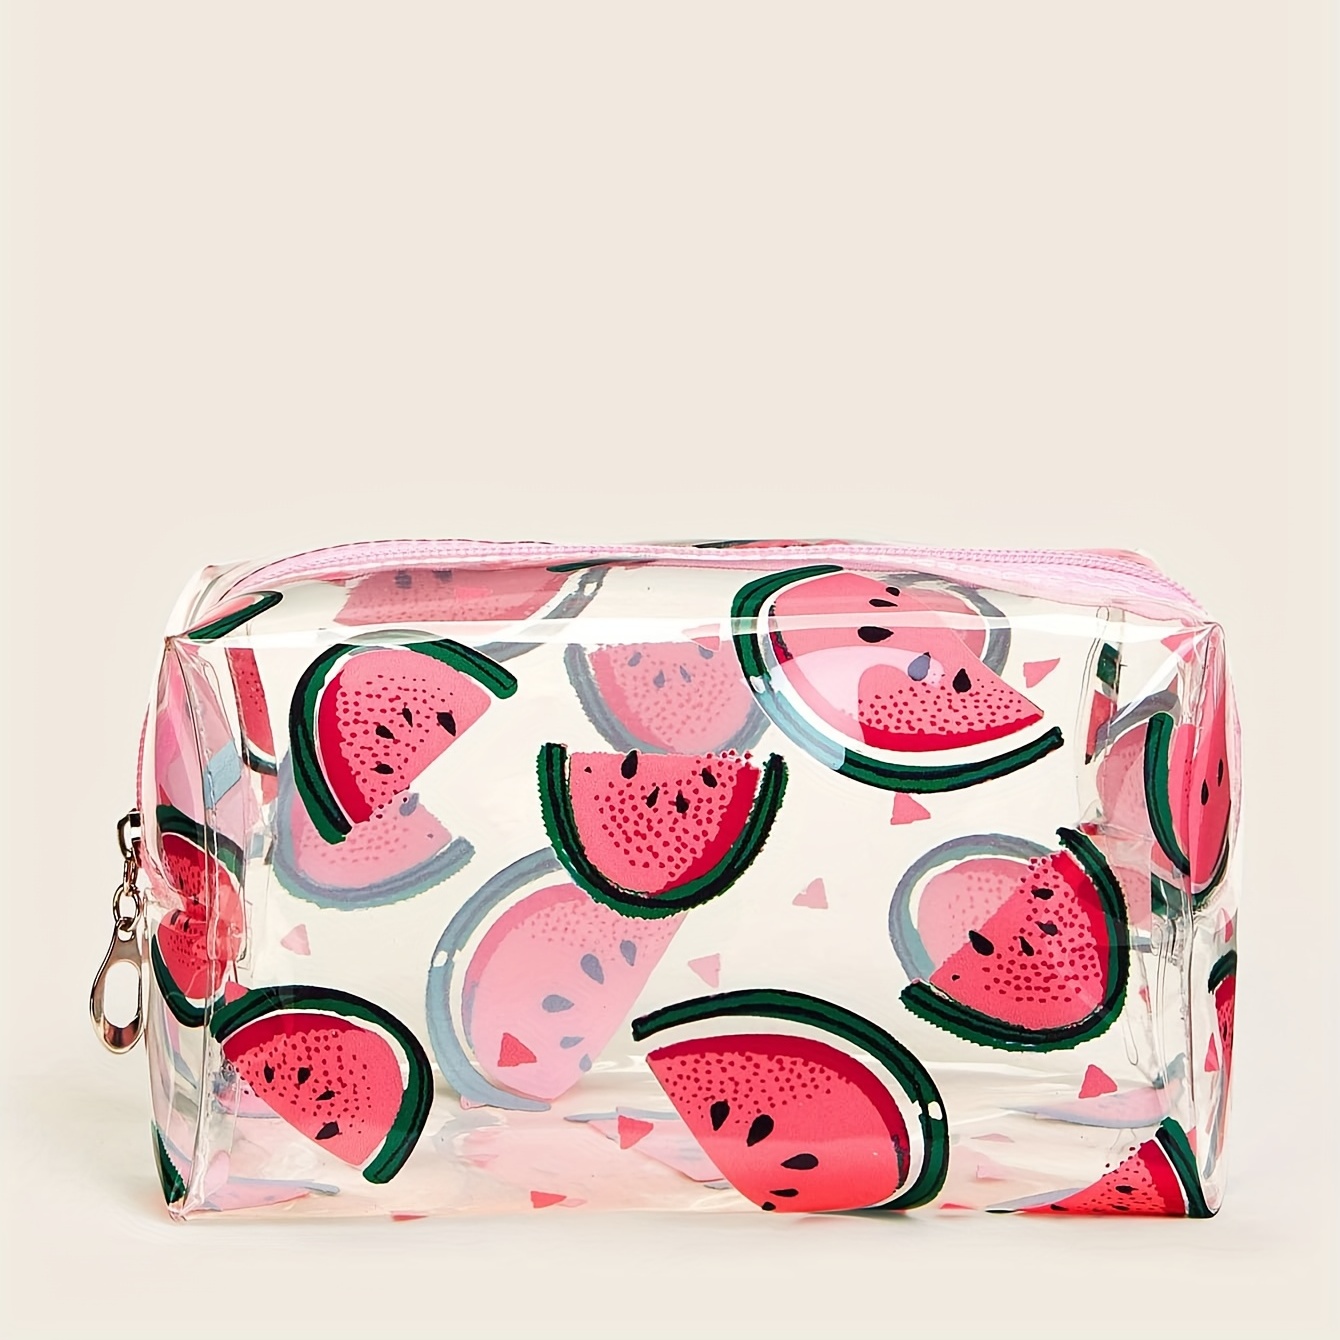 

Watermelon Pattern Waterproof Makeup Bag, Zipper Toiletry Bag For Women Small, Travel Makeup Pouch Adorable Roomy Travel Water Resistant Cosmetic Purse Accessories Organizer Women Gift